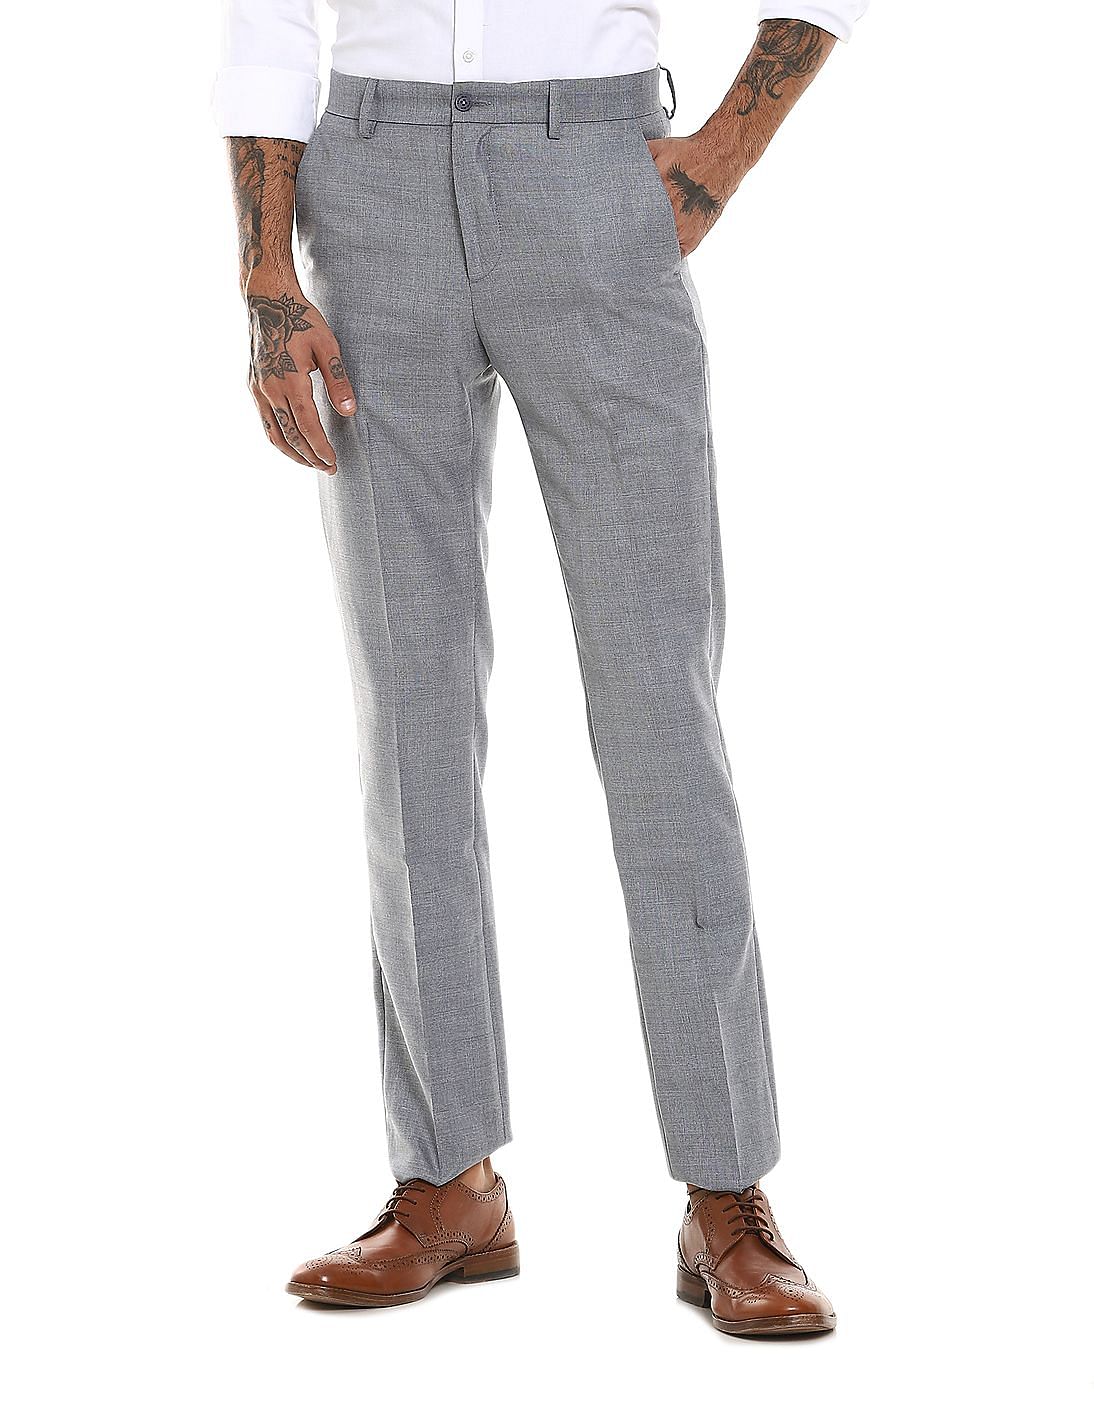 Excalibur Mens Relaxed Fit Formal Trousers  280053721Grey30IN35Grey30  Amazonin Fashion